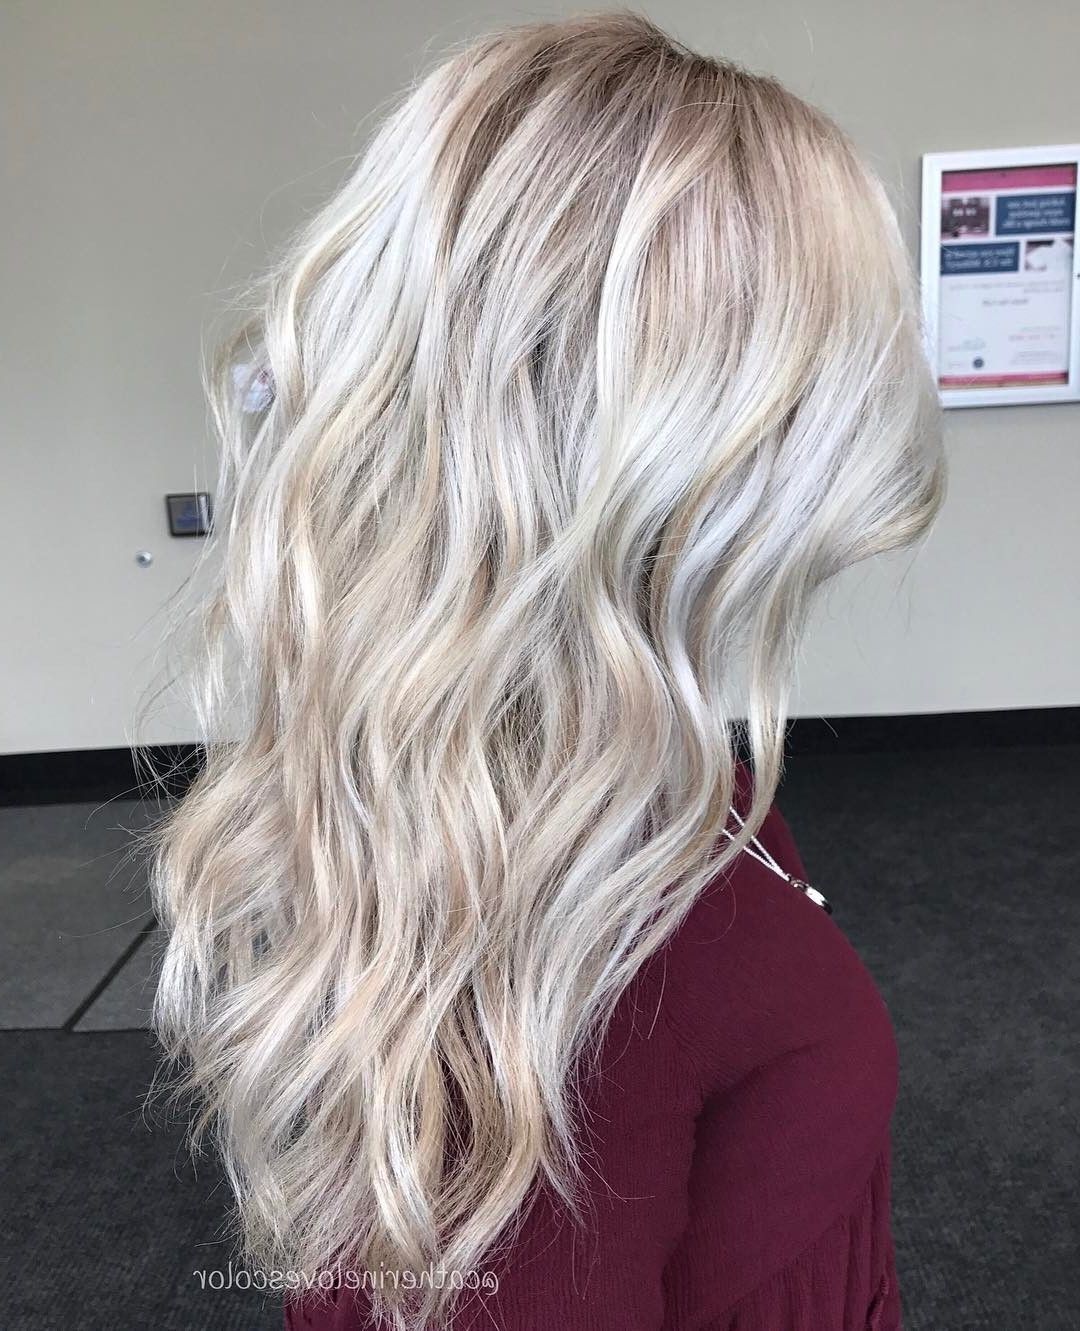 25 Cool Stylish Ash Blonde Hair Color Ideas For Short, Medium, Long Hair Within Preferred Wheat Blonde Hairstyles (View 19 of 20)